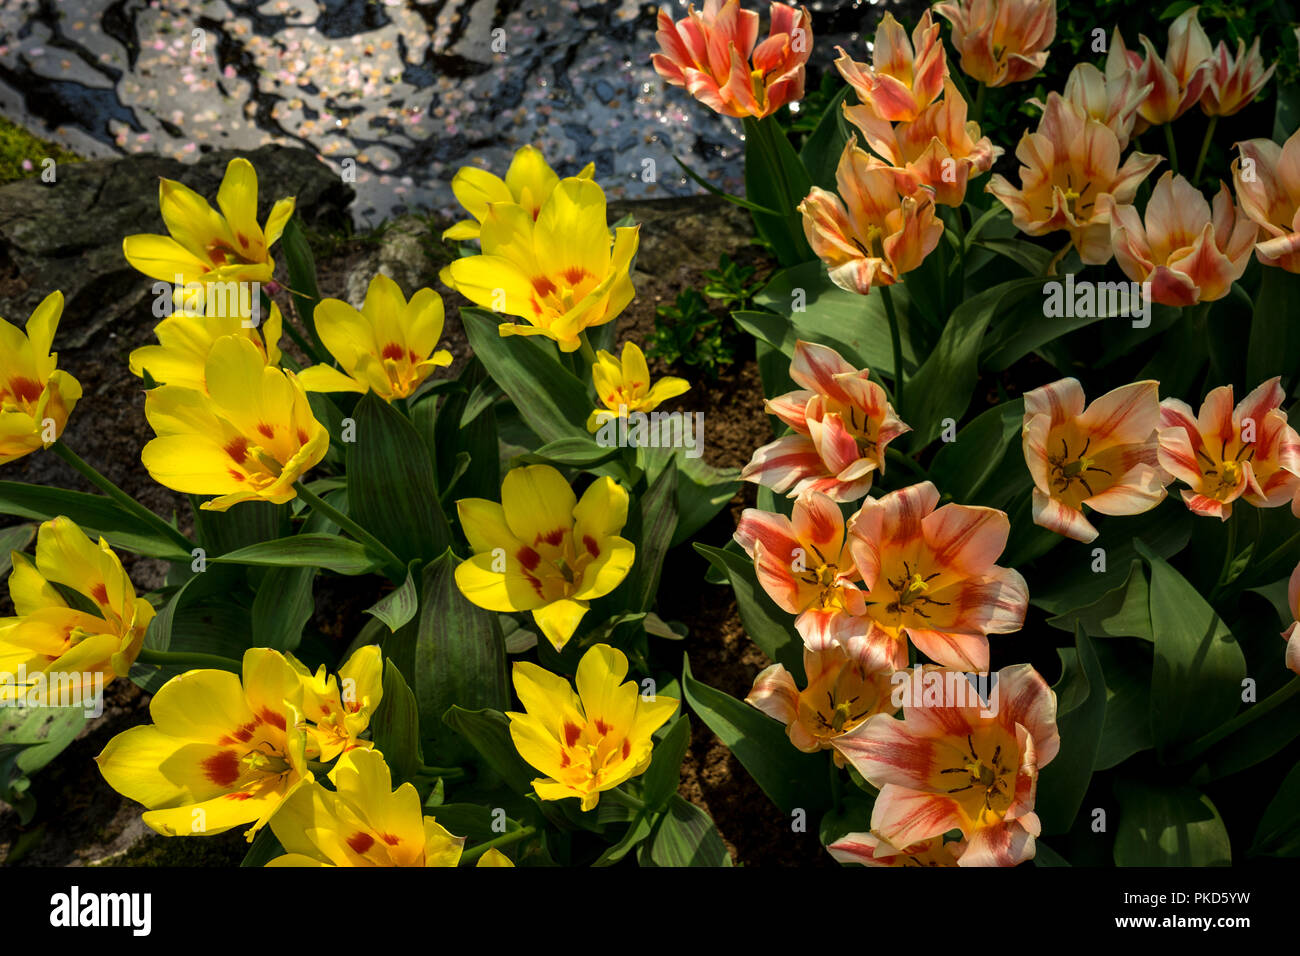 Netherlands,Lisse,Europe, HIGH ANGLE VIEW OF YELLOW FLOWERING PLANTS Stock Photo